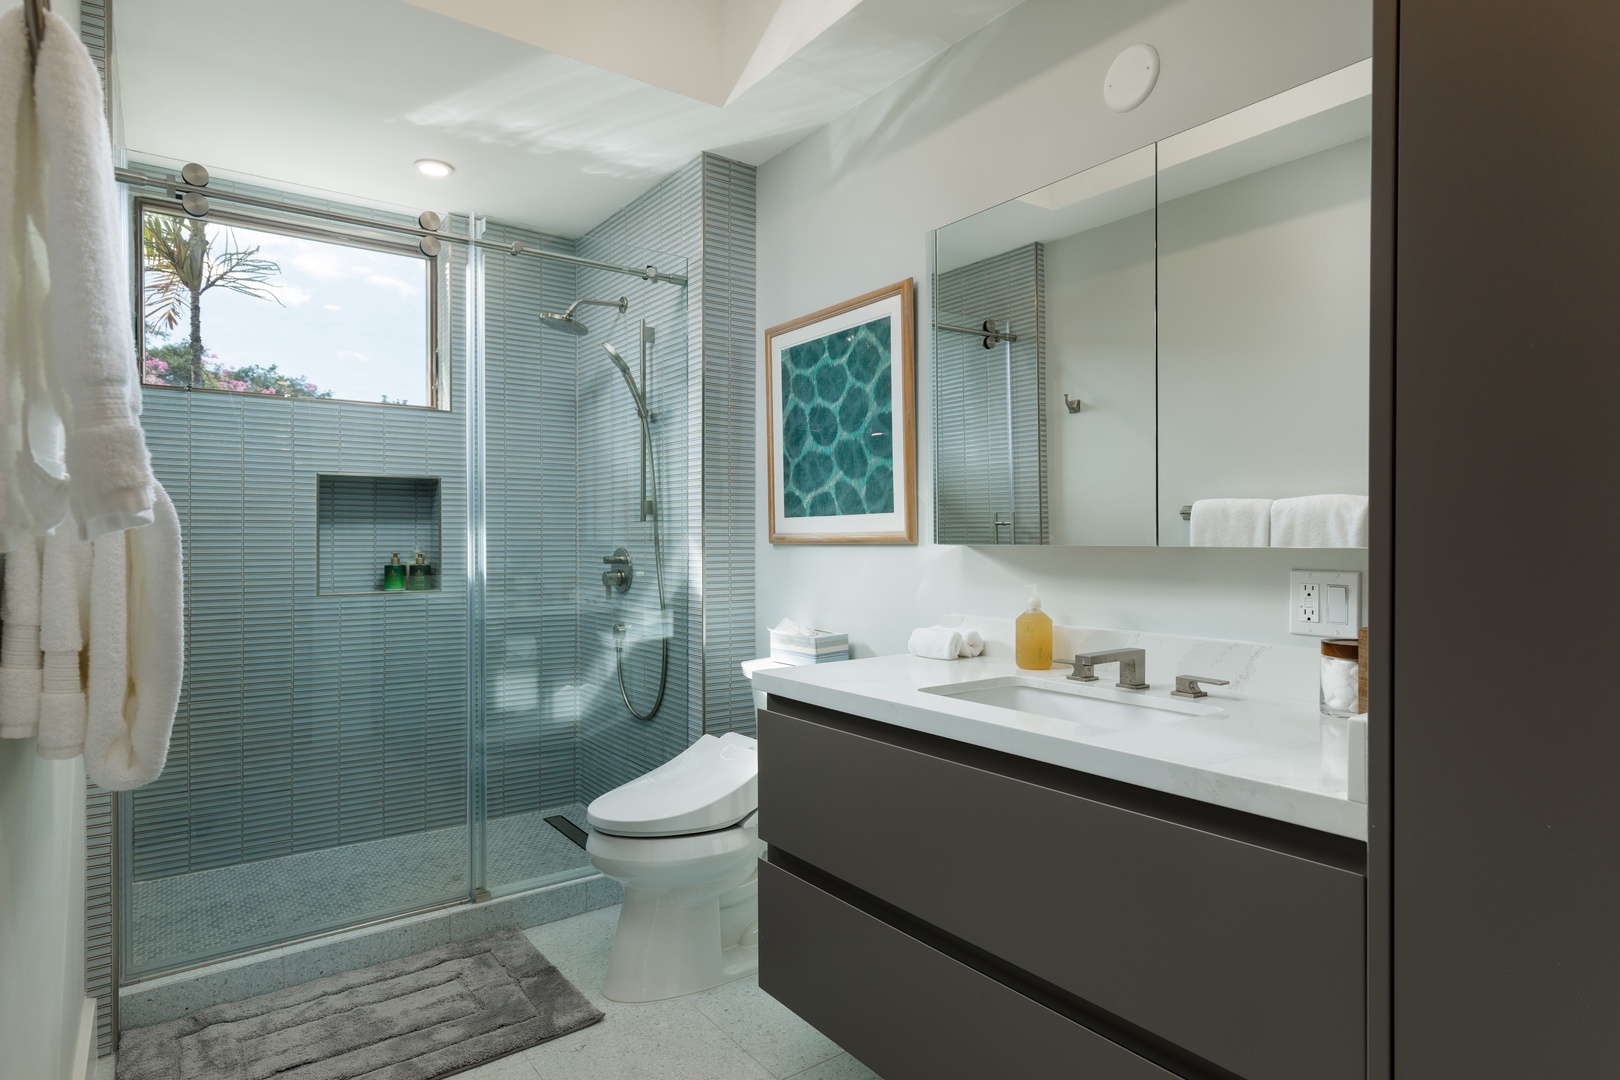 Kailua Kona Vacation Rentals, 3BD Fairways Villa (104A) at Four Seasons Resort at Hualalai - Ensuite bathroom with a walk-in shower in a glass enclosure.